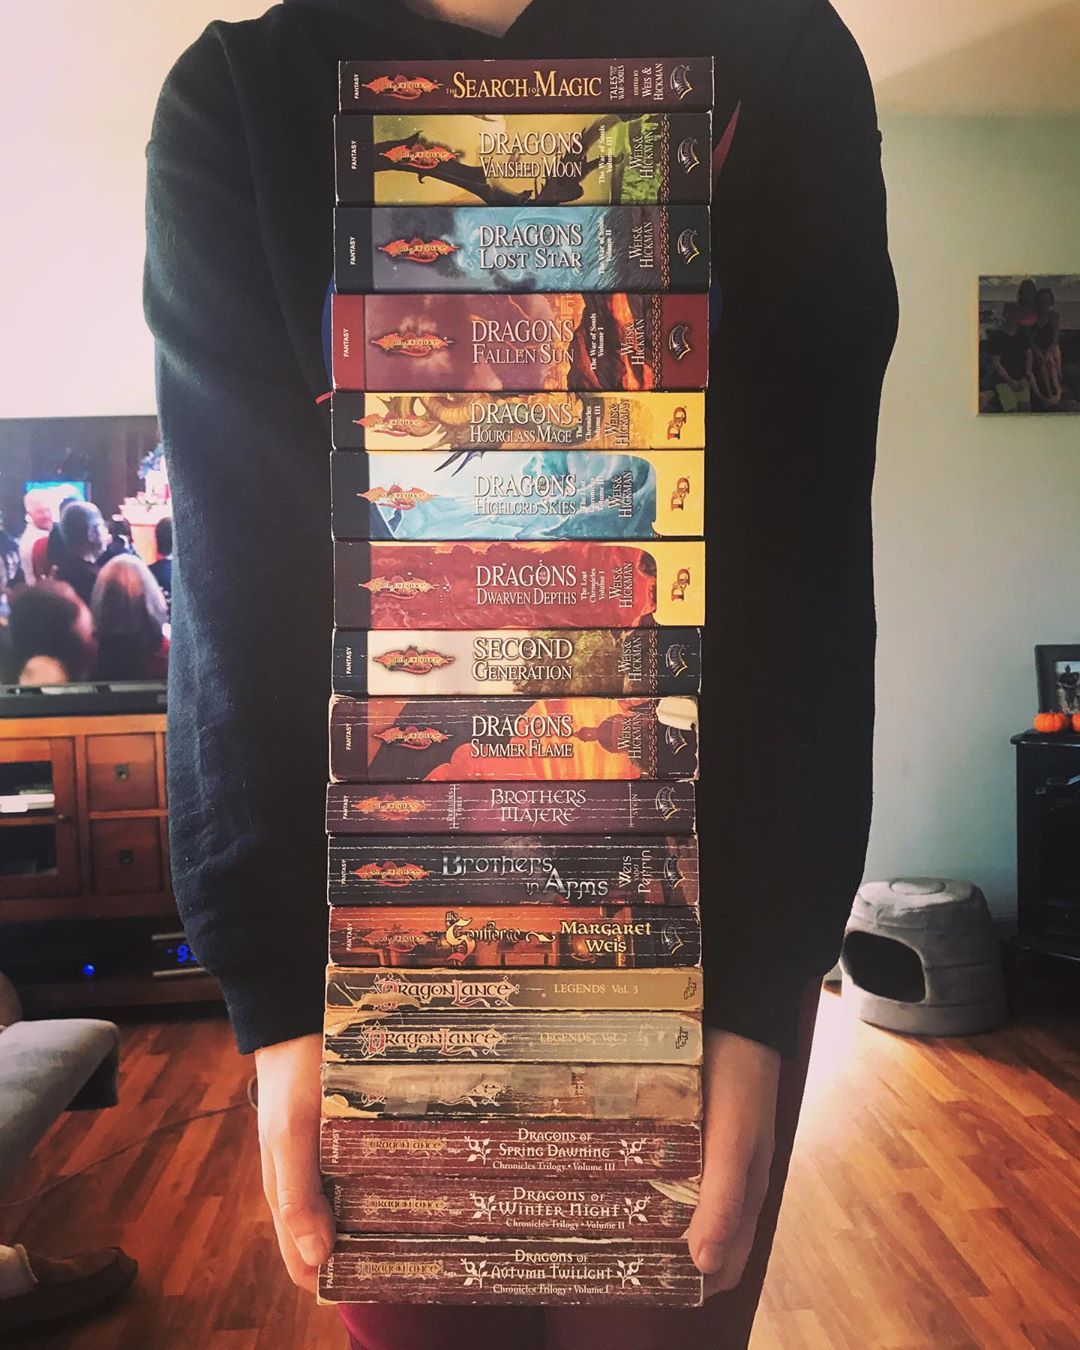 We’re halfway done with the Dragons of Autumn Twilight readalong, and I am having such a blast discussing the story and characters with other readers, so thought I’d share my DragonLance stack. I haven’t read all of them, but some of them are clearly...